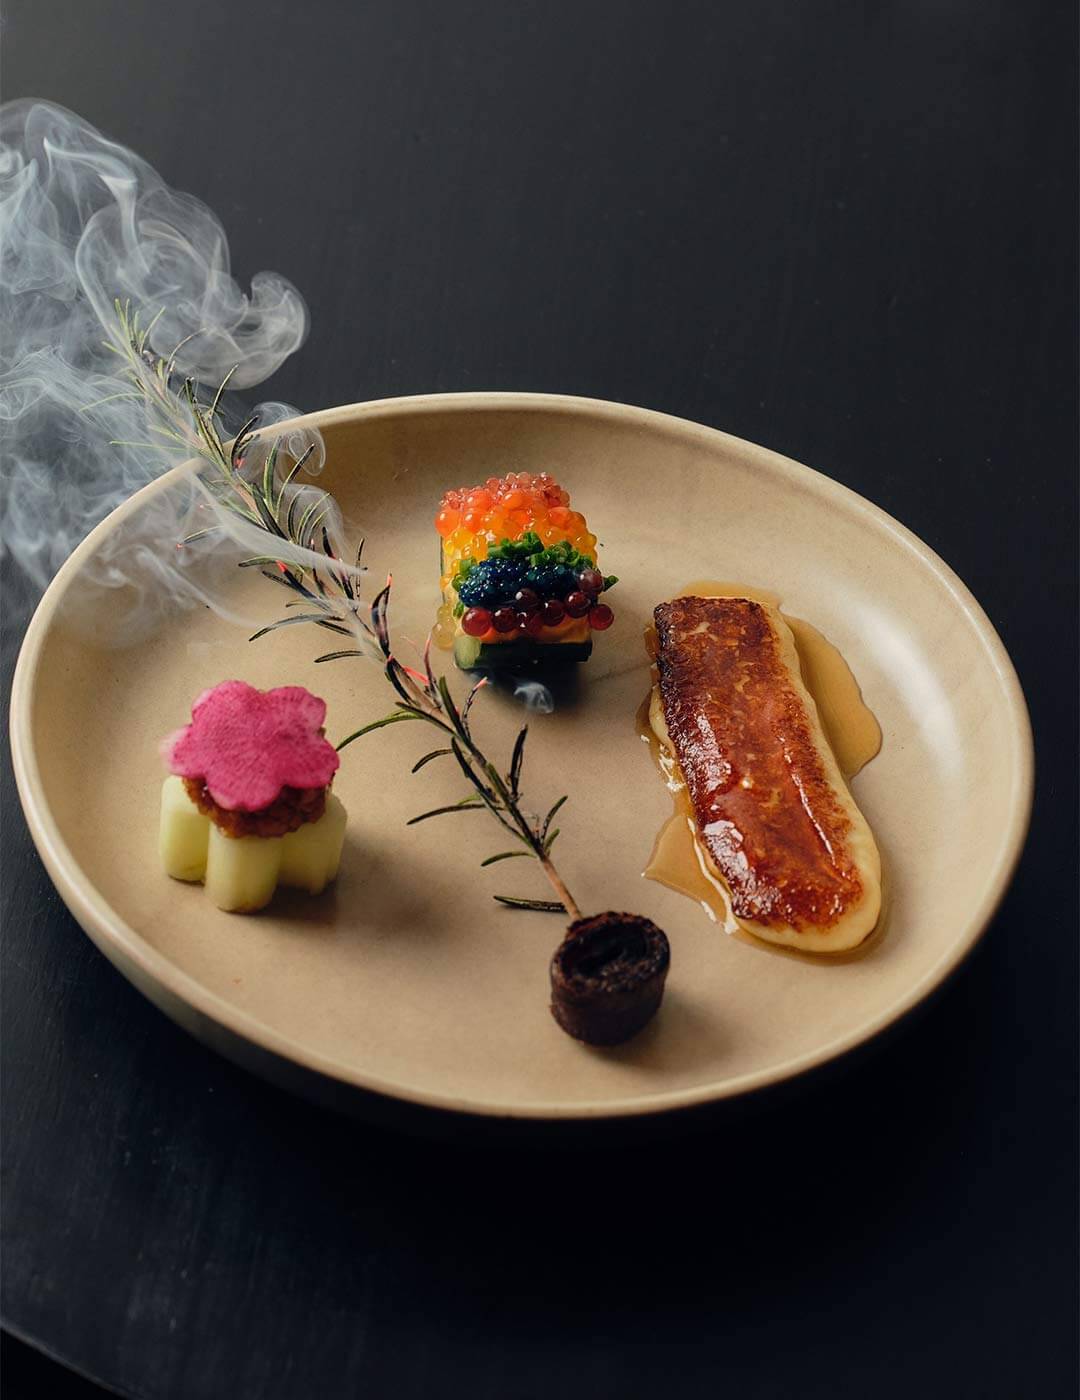 Beautifully presented fine dining entree at Emerald City restaurant in Healesville, with honey whisky halloumi, rainbow caviar, and smoked rosemary skewer.